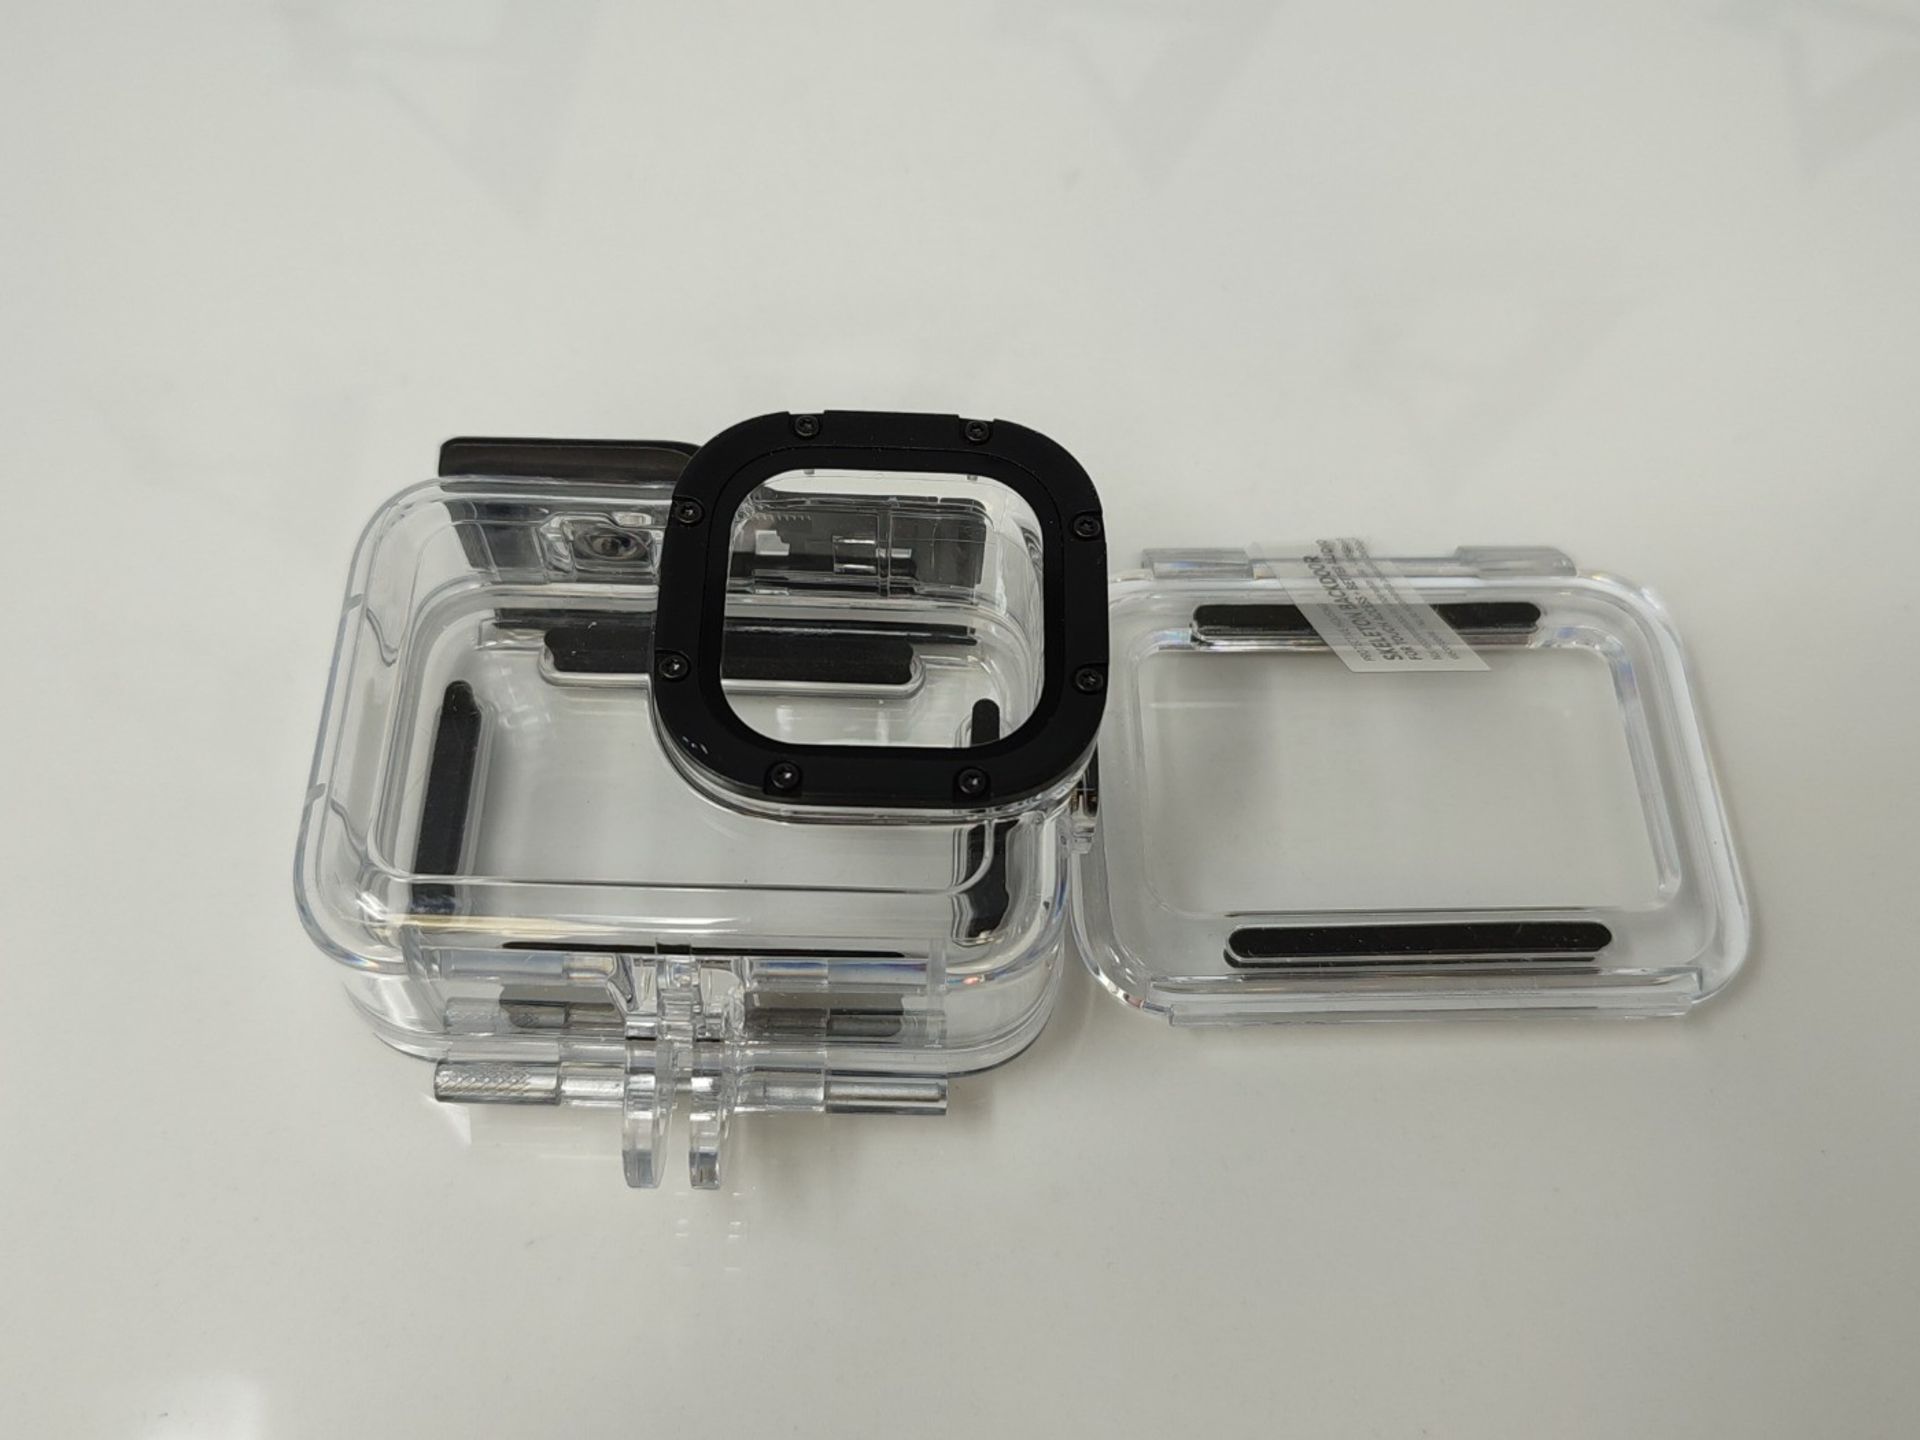 Protective case (HERO10 Black/HERO9 Black) - Official GoPro accessory - Image 3 of 3